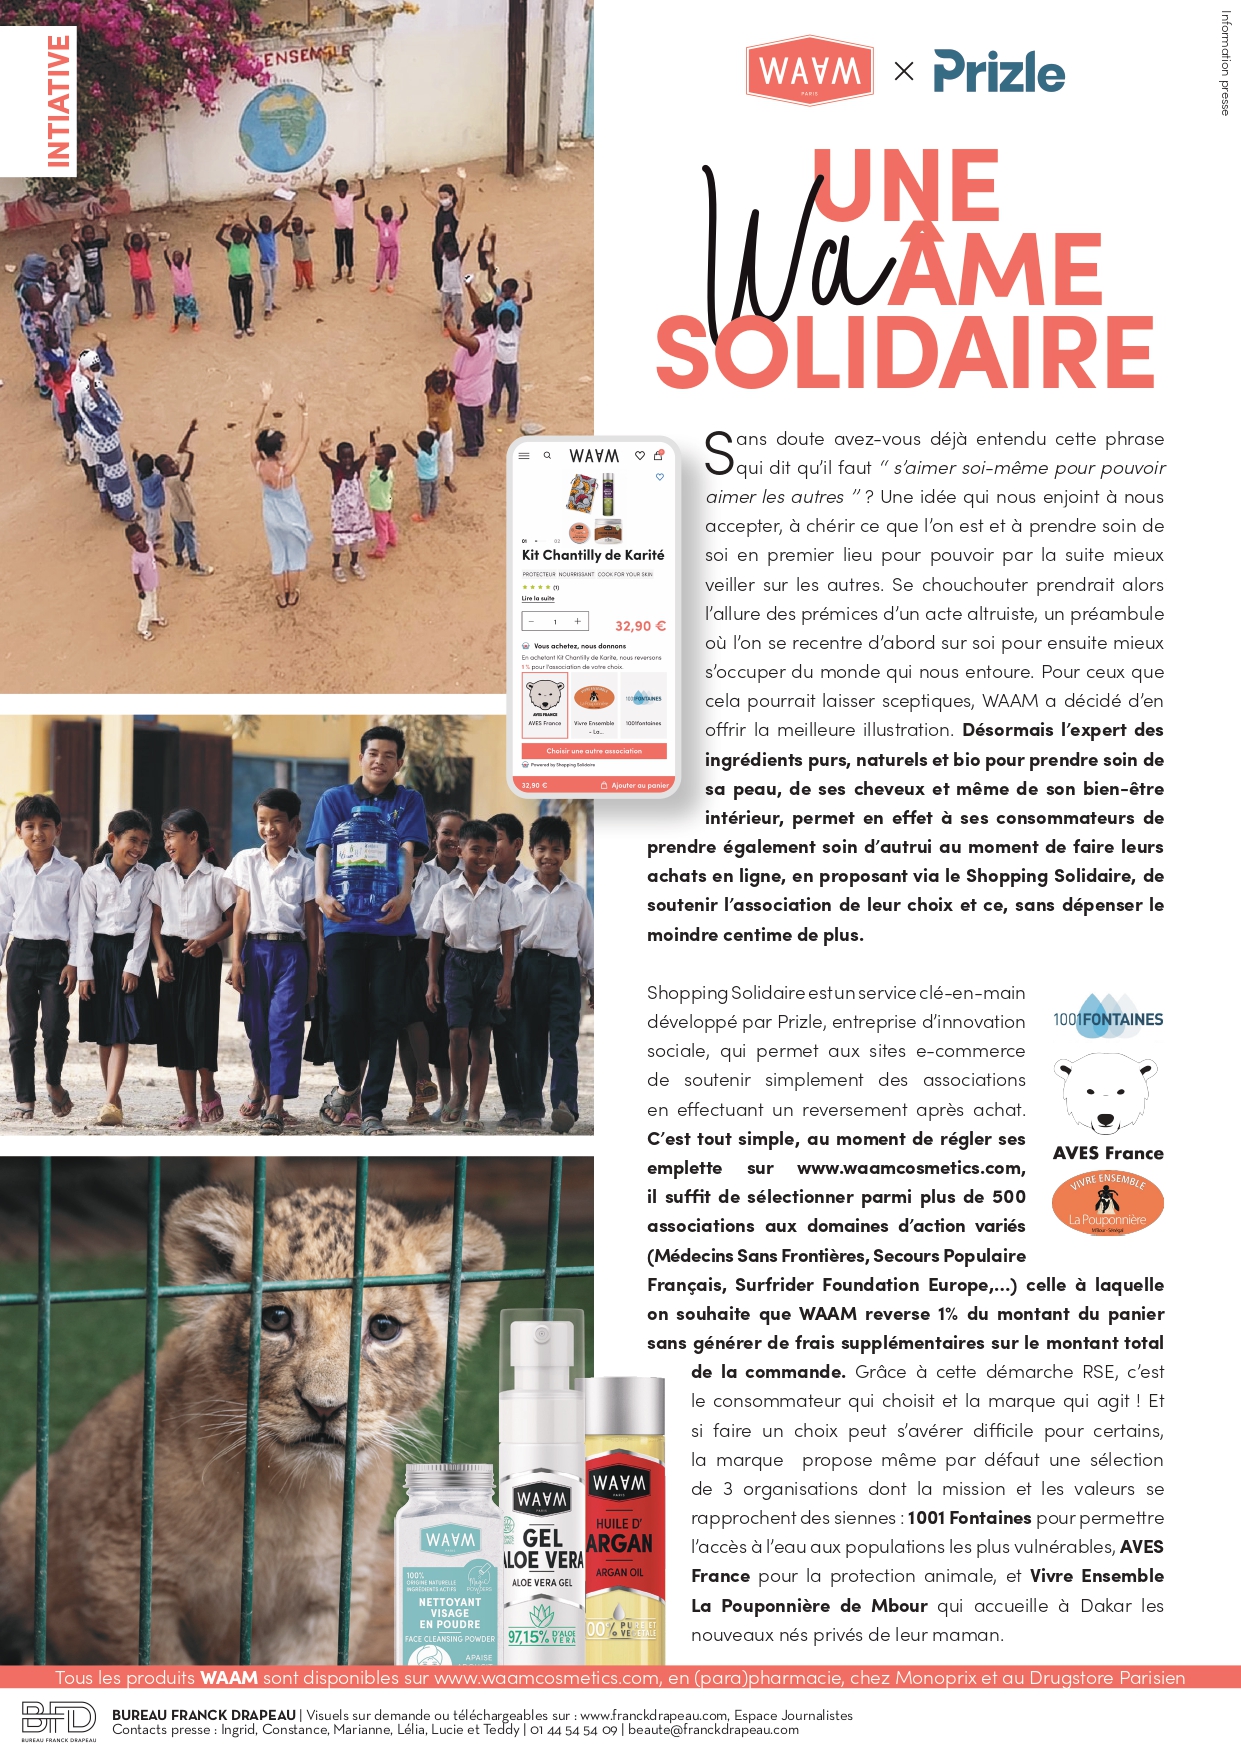 WAAM | Shopping Solidaire